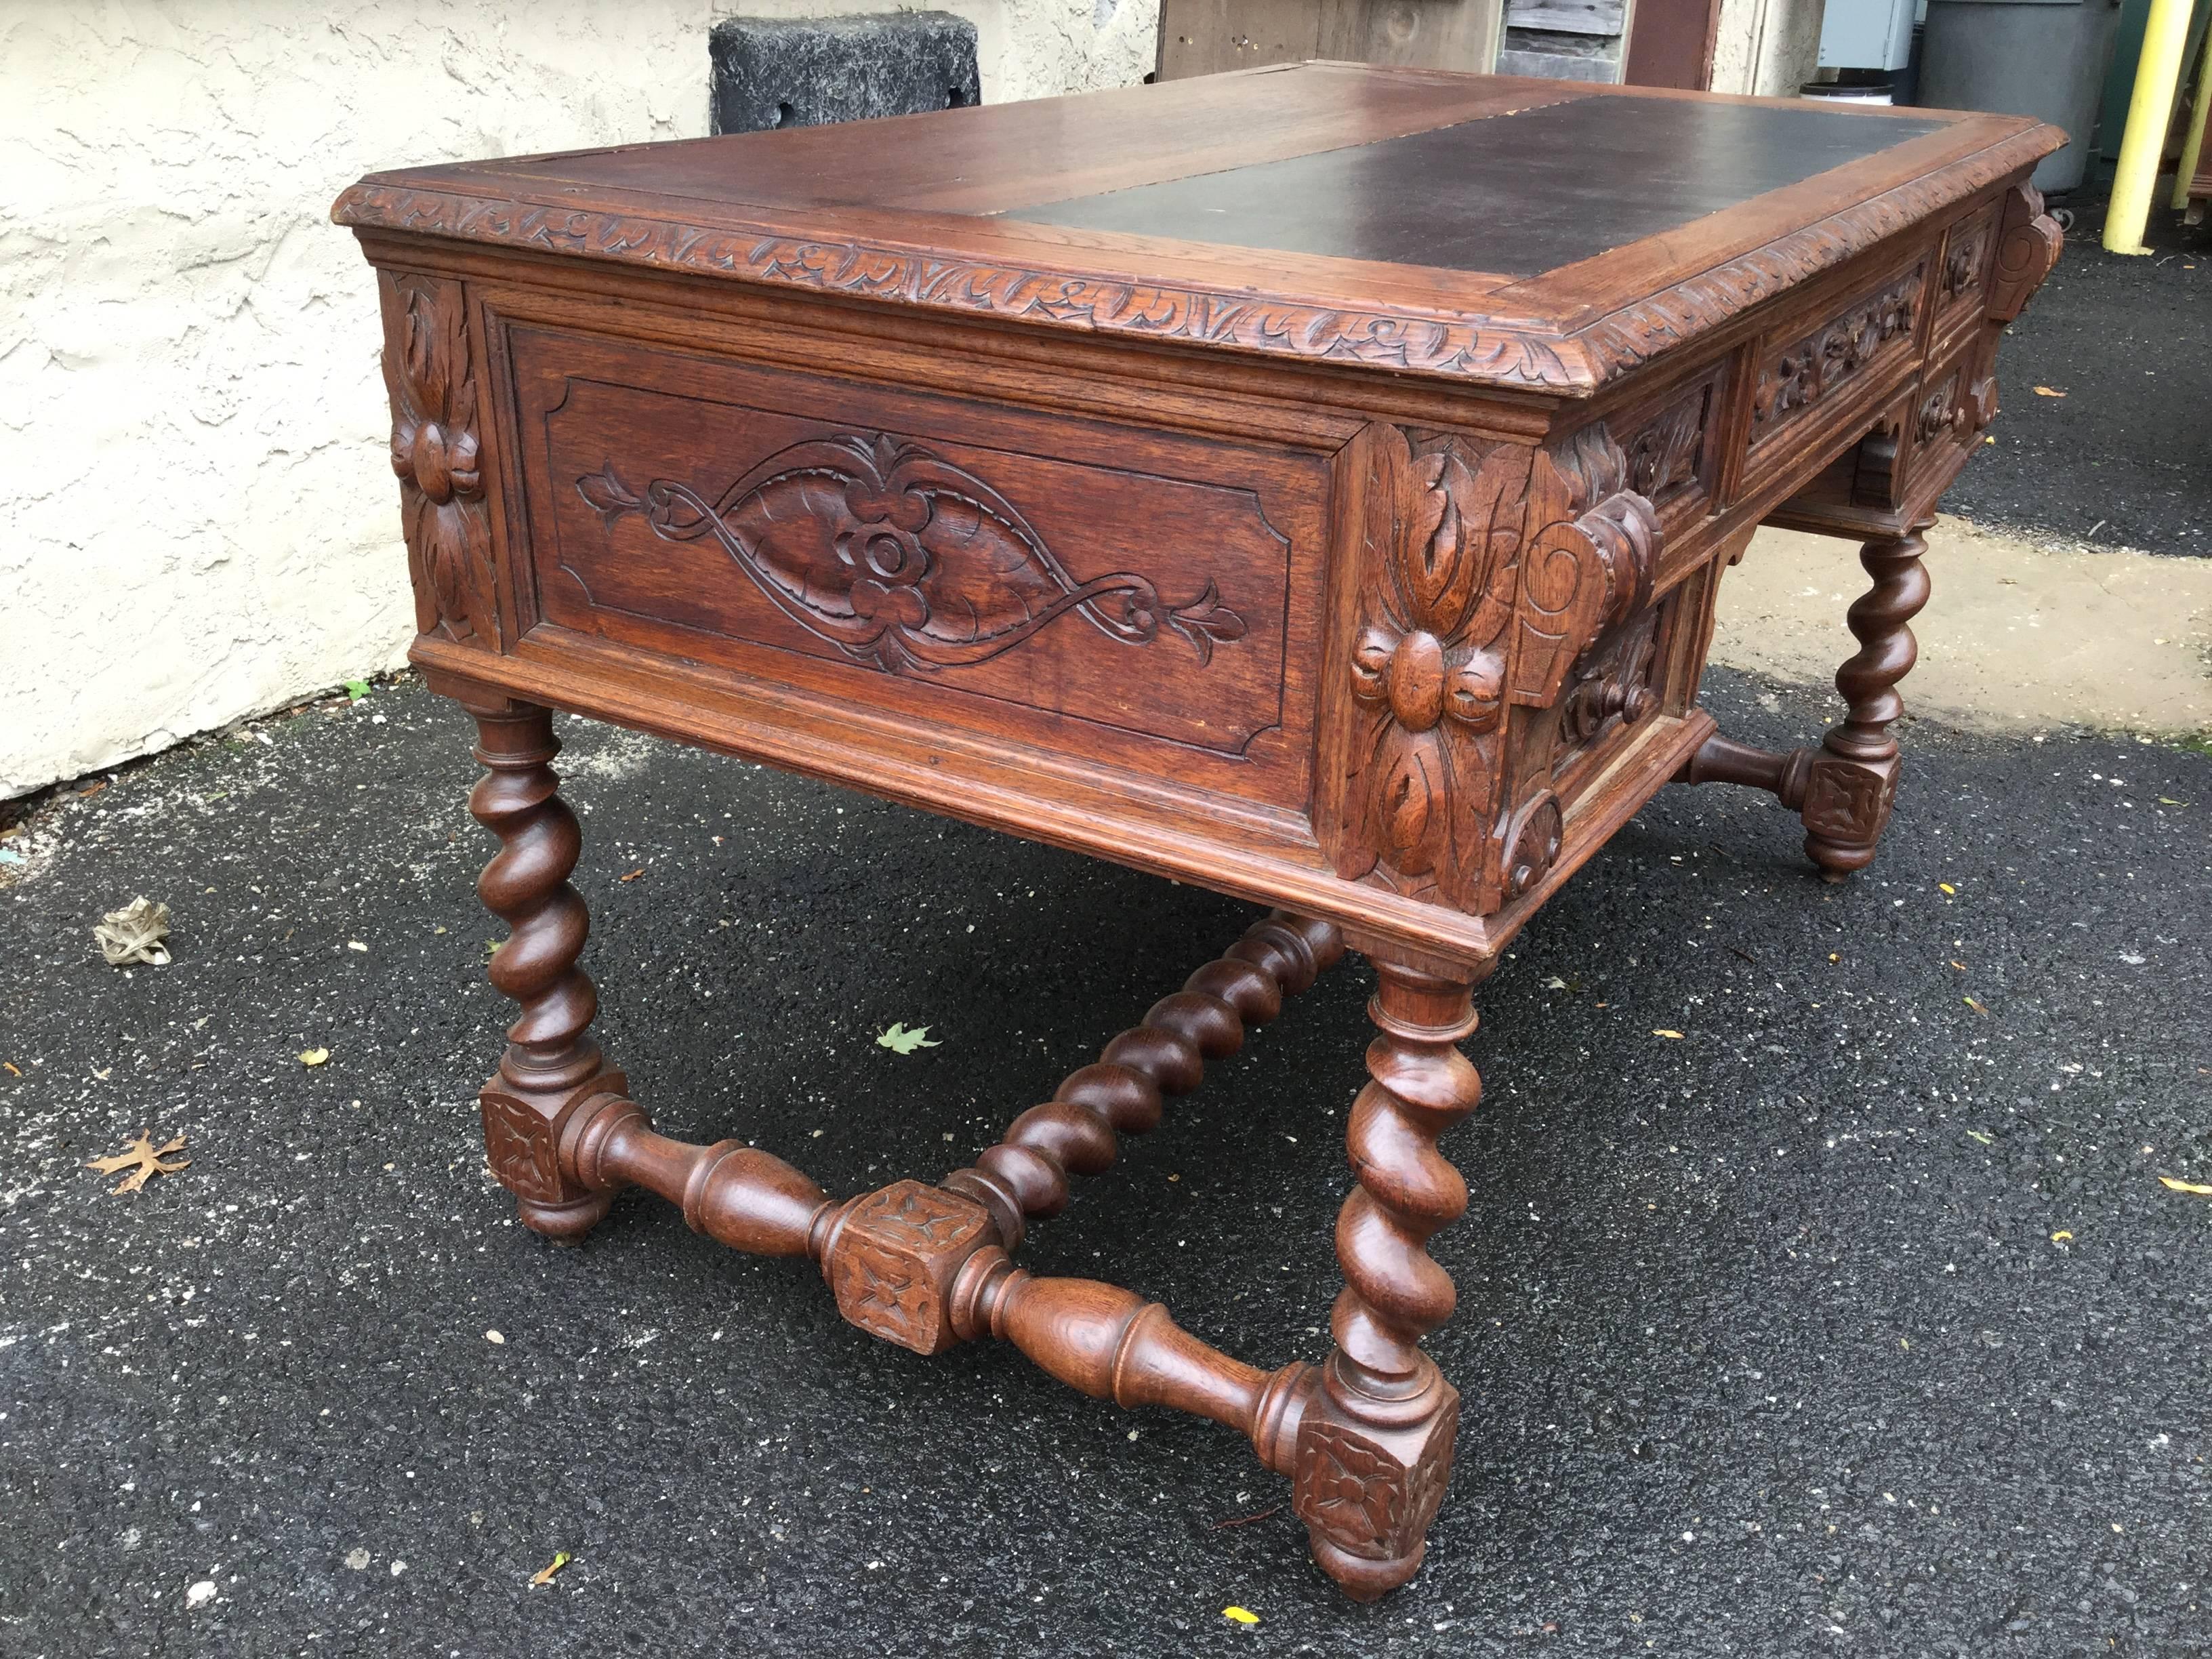 19th century desk on turned barley-twist legs with ornate carvings on all
the drawer fronts. The top work surface, which is covered in black
leather, can be pulled out for more work space. Each drawer has original
locks and hardware.  Back of desk